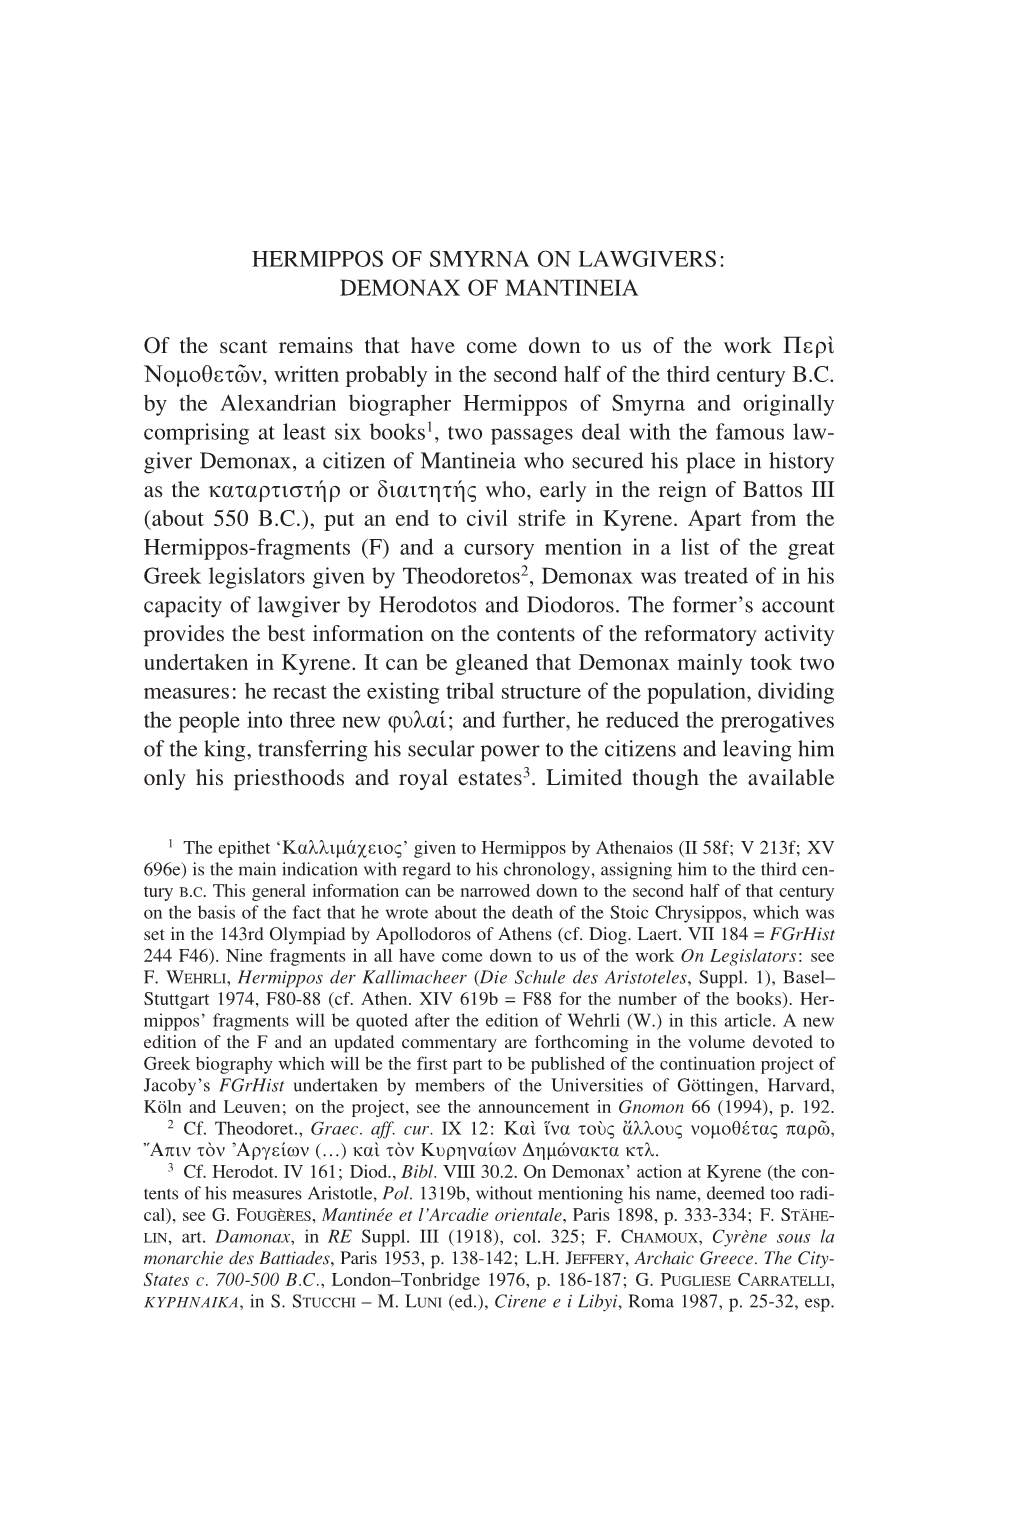 Hermippos of Smyrna on Lawgivers: Demonax of Mantineia